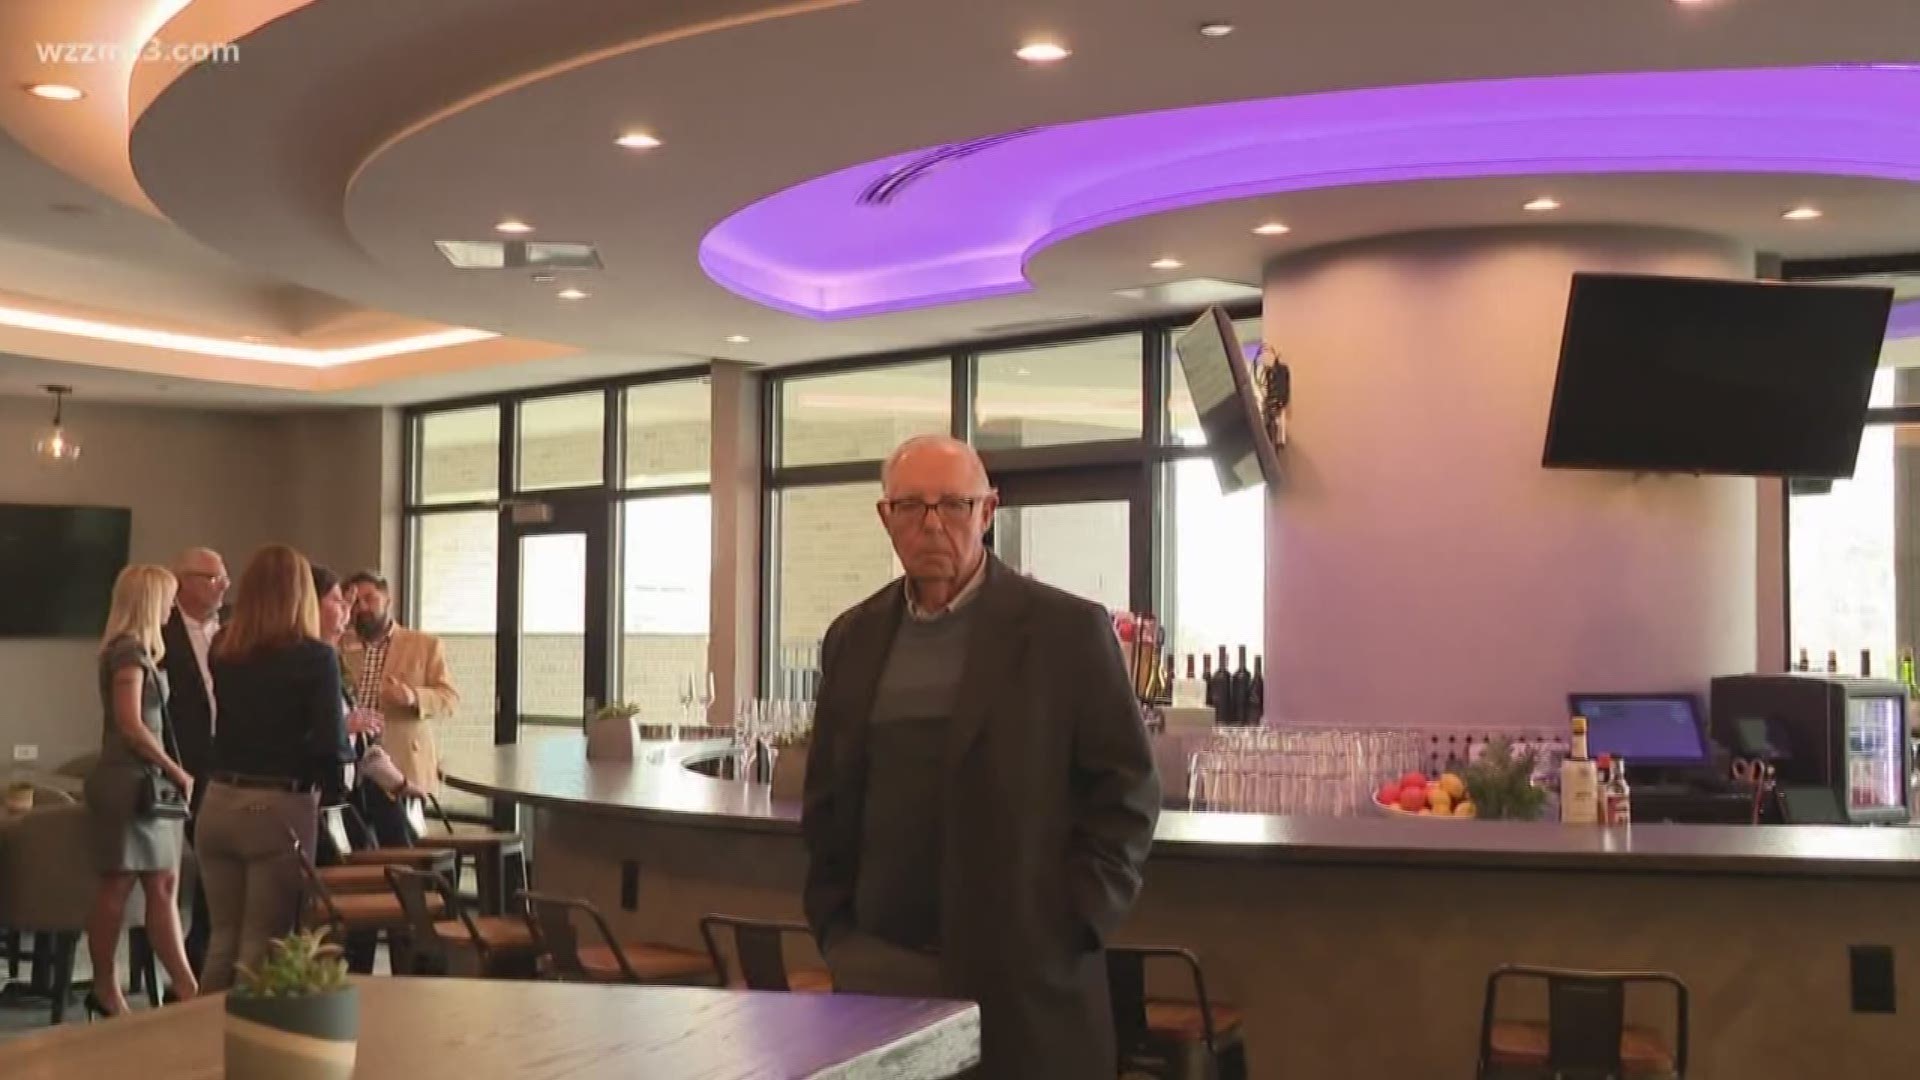 Grand Rapids has a new restaurant and hotel near the downtown area.

Embassy Suites and Big E's Sports Grill hosted a ribbon cutting ceremony Thursday morning on Monroe Avenue across from Sixth Street Park.